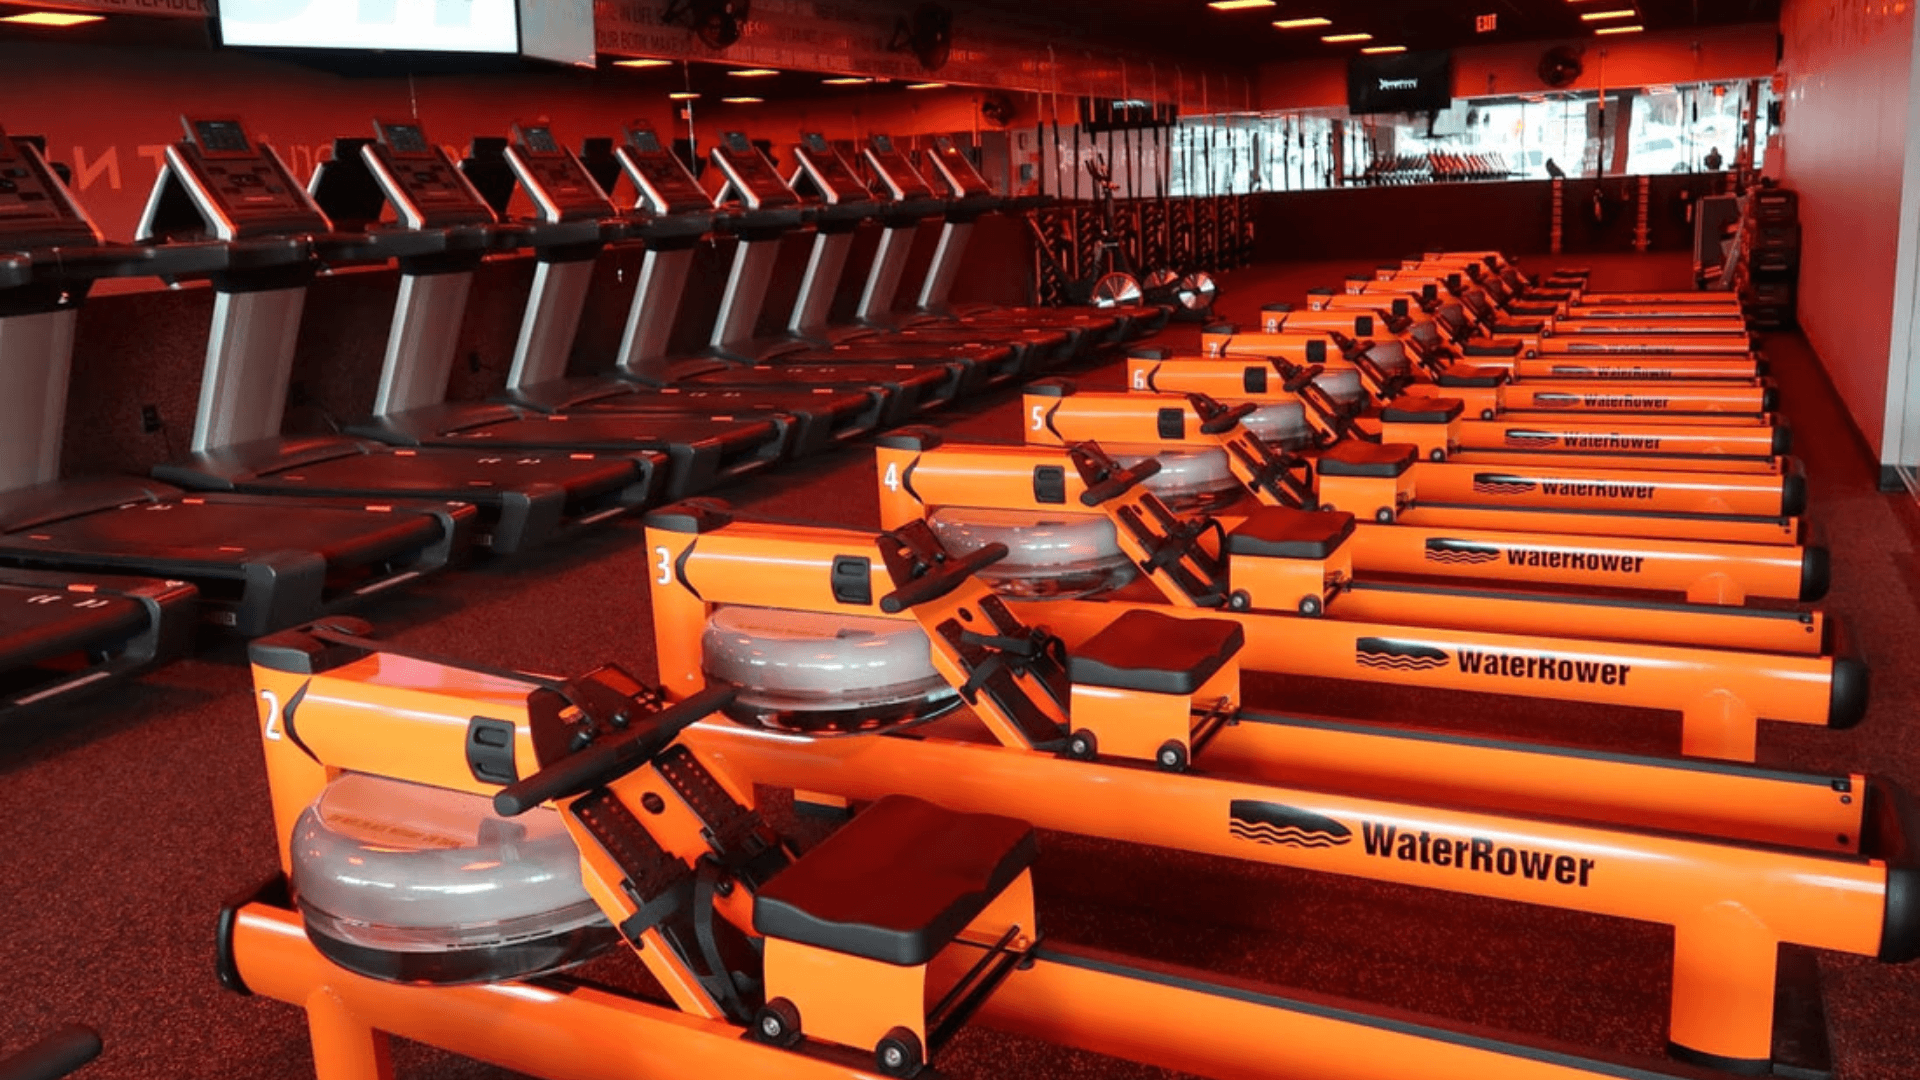 Does Orangetheory Fitness work for weight loss and muscle toning